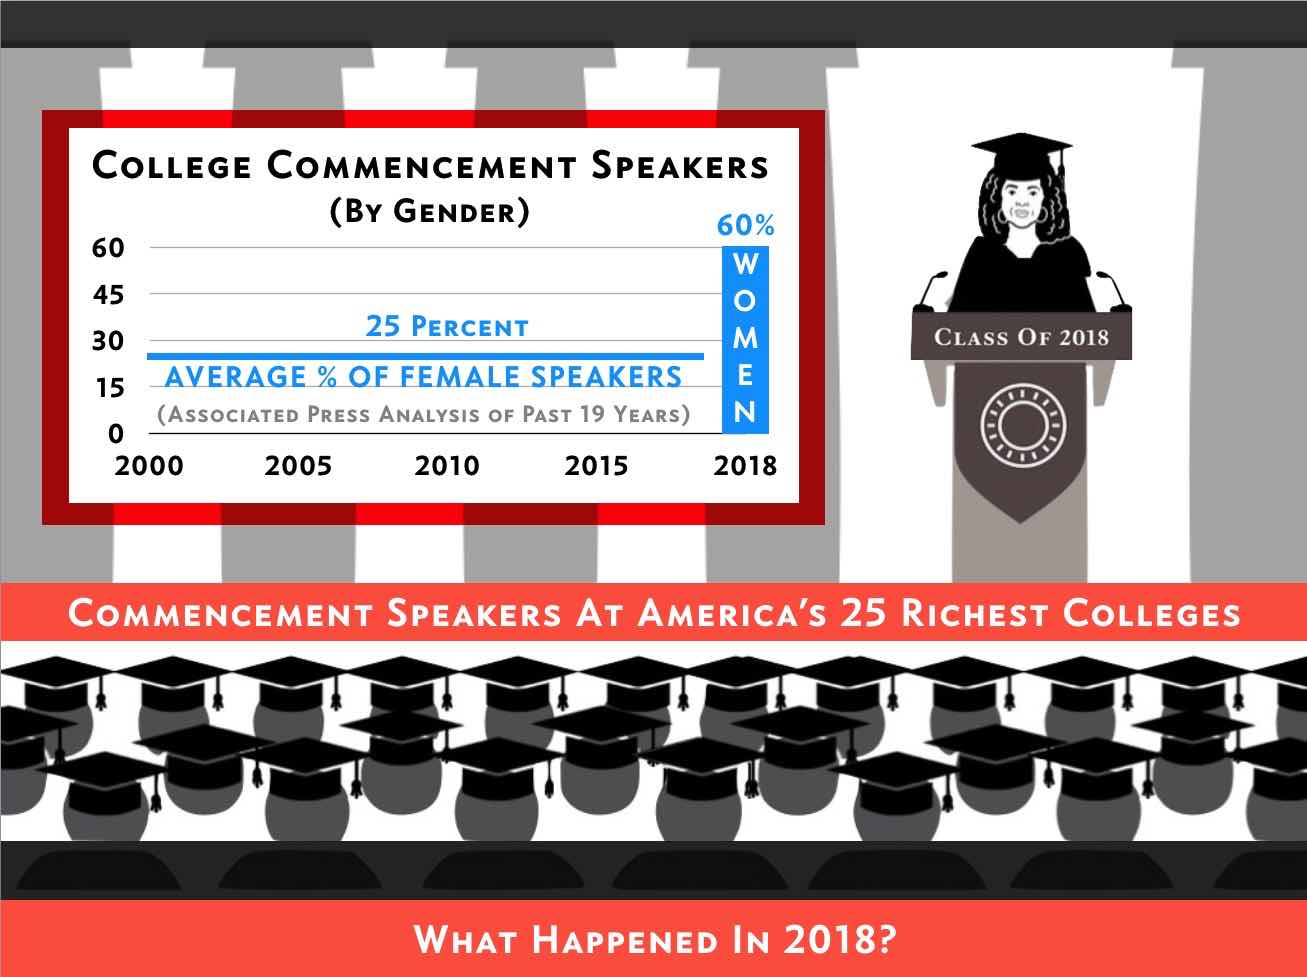 College Commencement Speakers